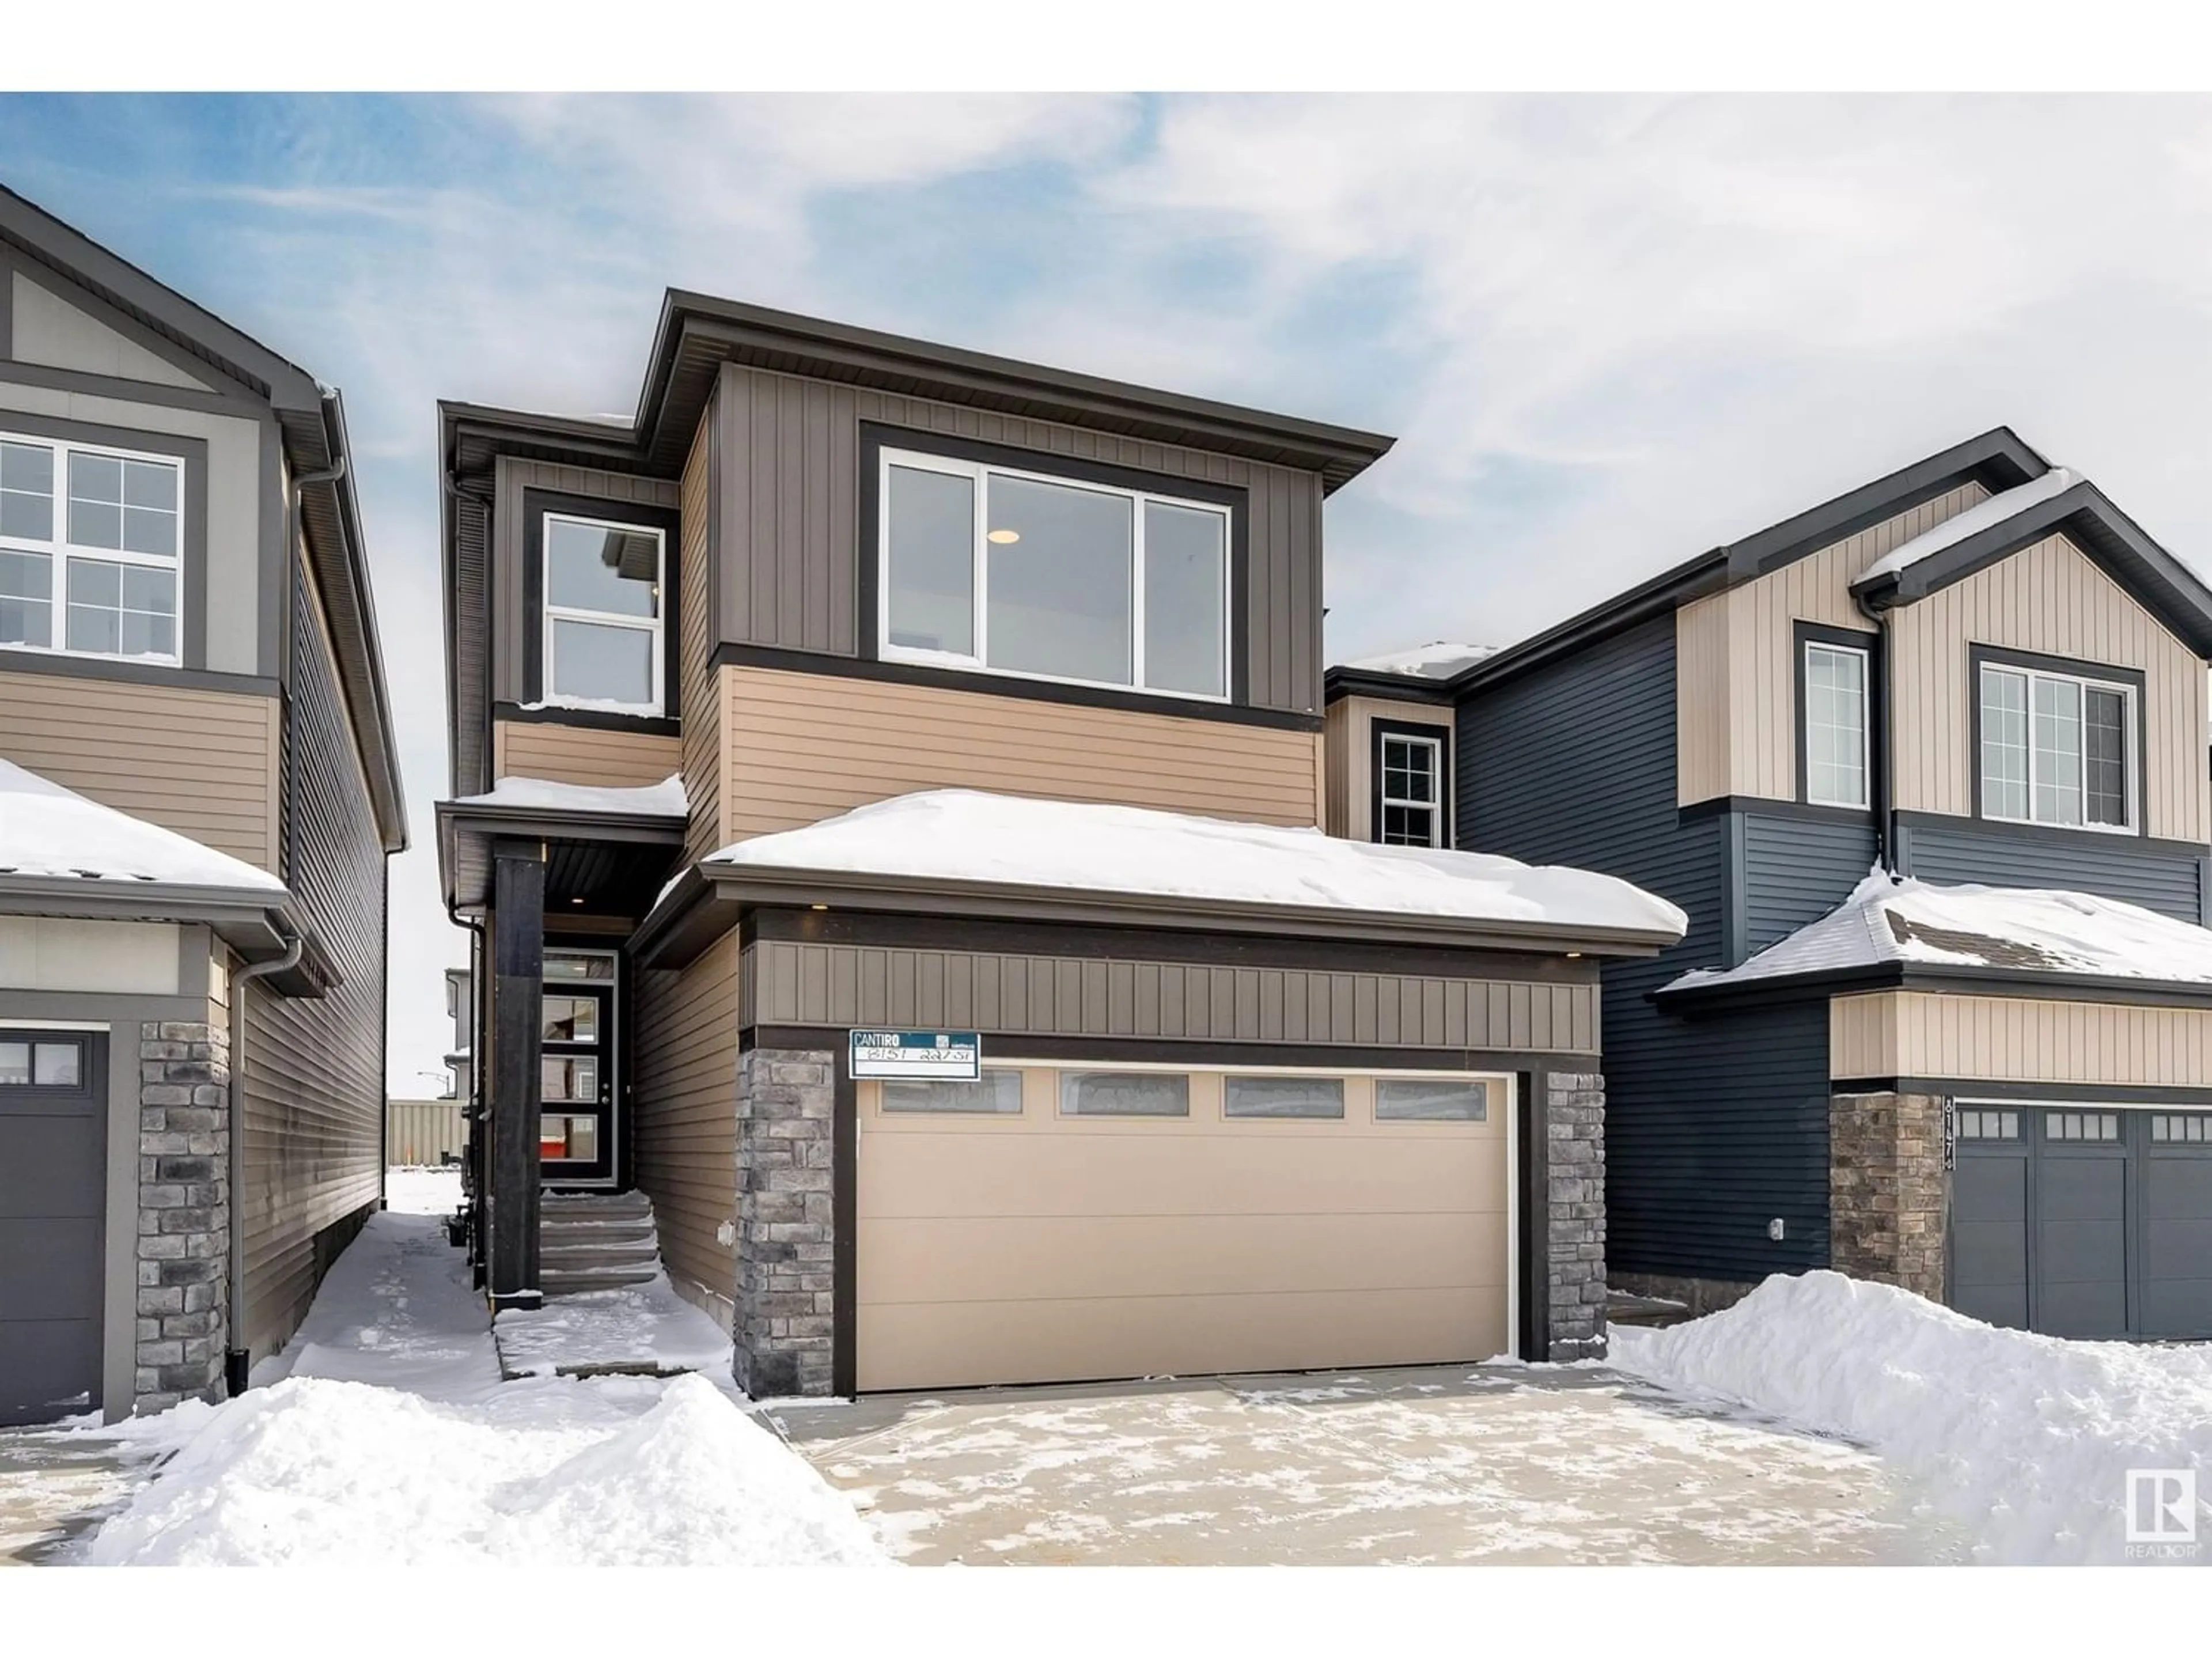 Home with vinyl exterior material for 8151 227 ST NW, Edmonton Alberta T5T7R8